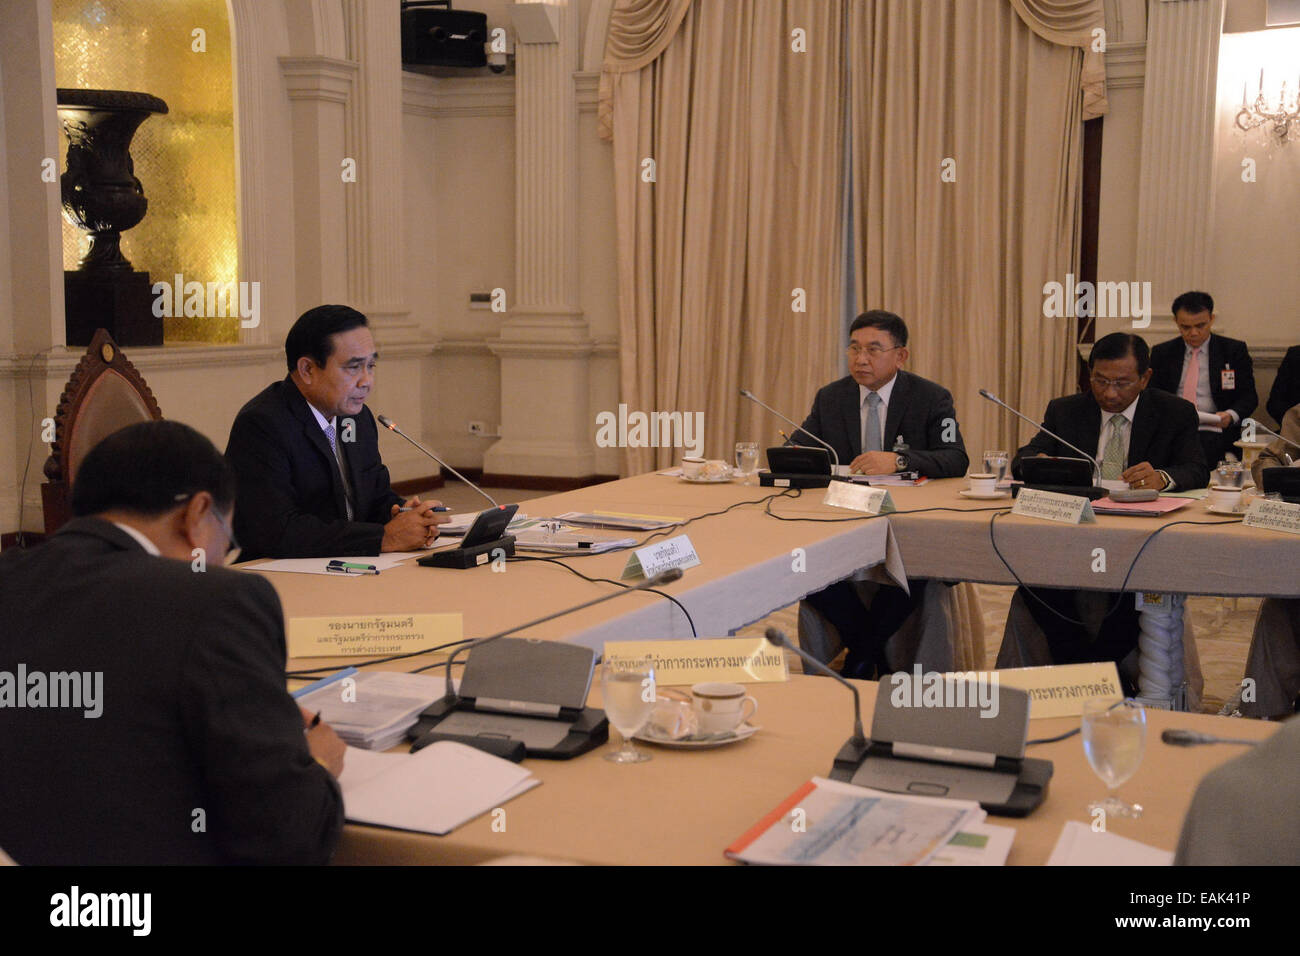 (141117) -- BANGKOK, Nov. 17, 2014 (Xinhua) -- Thai Prime Minister Prayuth Chan-ocha (2nd L) chairs the meeting of Policy Committee on Special Economic Zone Development at the Government House in Bangkok, Thailand, Nov.17, 2014. (Xinhua/Rachen Sageamsak)(bxq) Stock Photo